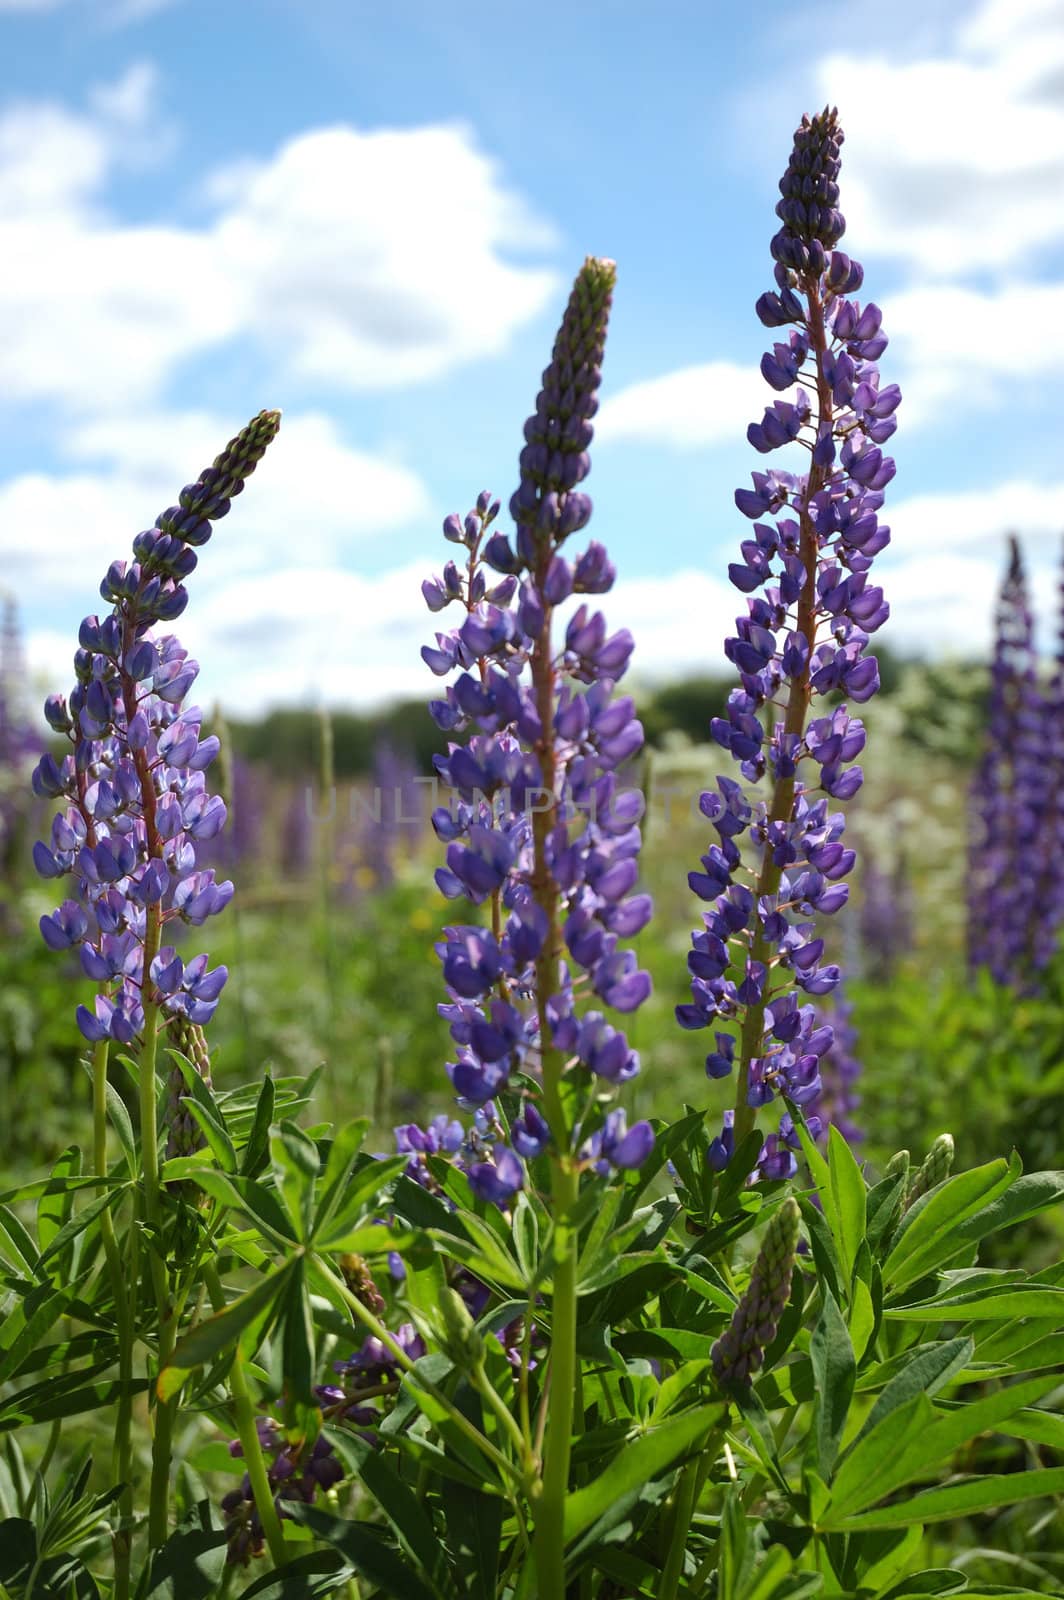 Blooming lupines on the field